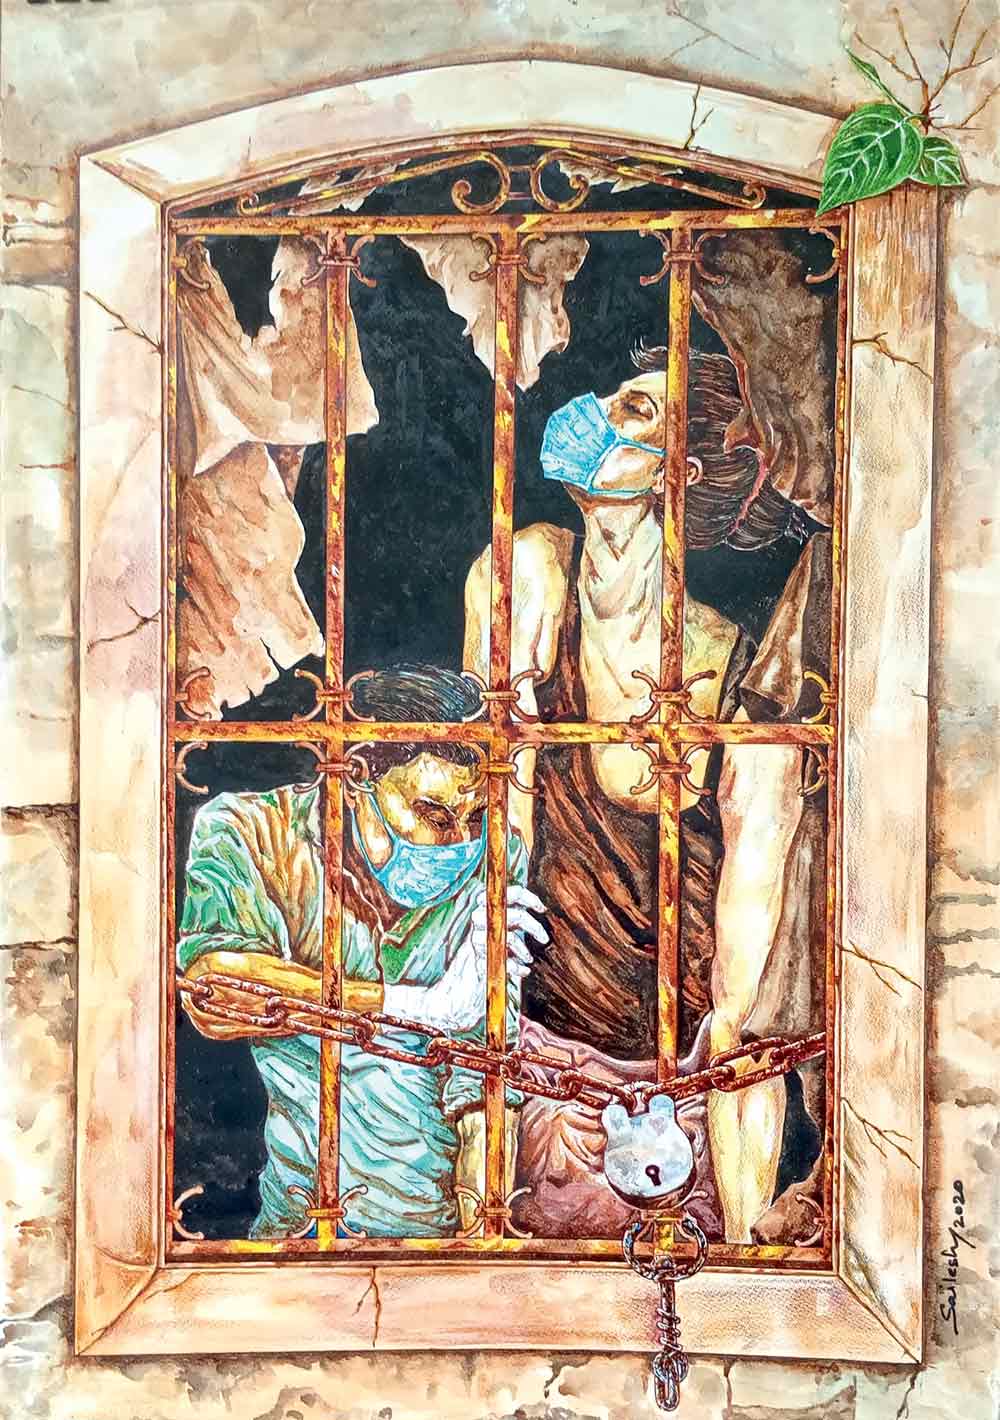 Figurative Drawing with Mixed Media on Paper "Lockdown-1" art by Sailesh Bose